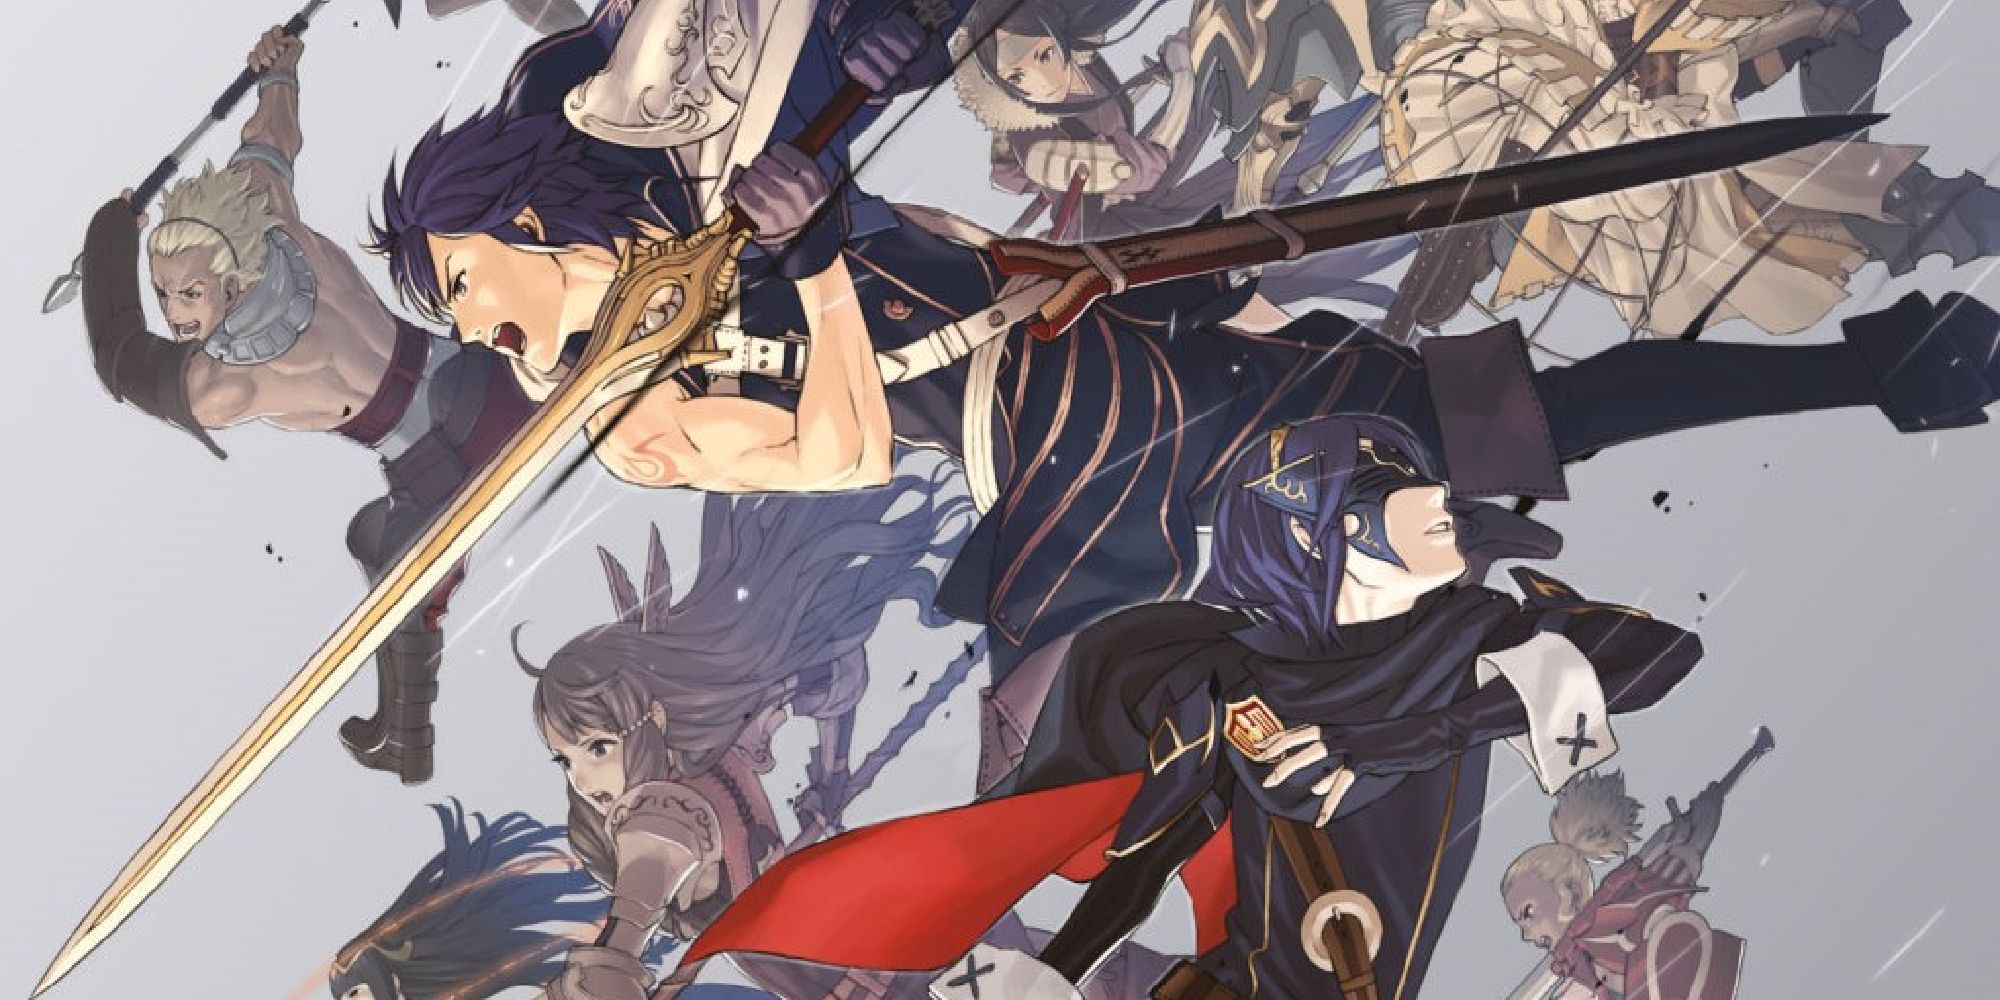 Chrom and Lucina in front of the rest of the Fire Emblem Awakening cast on the box